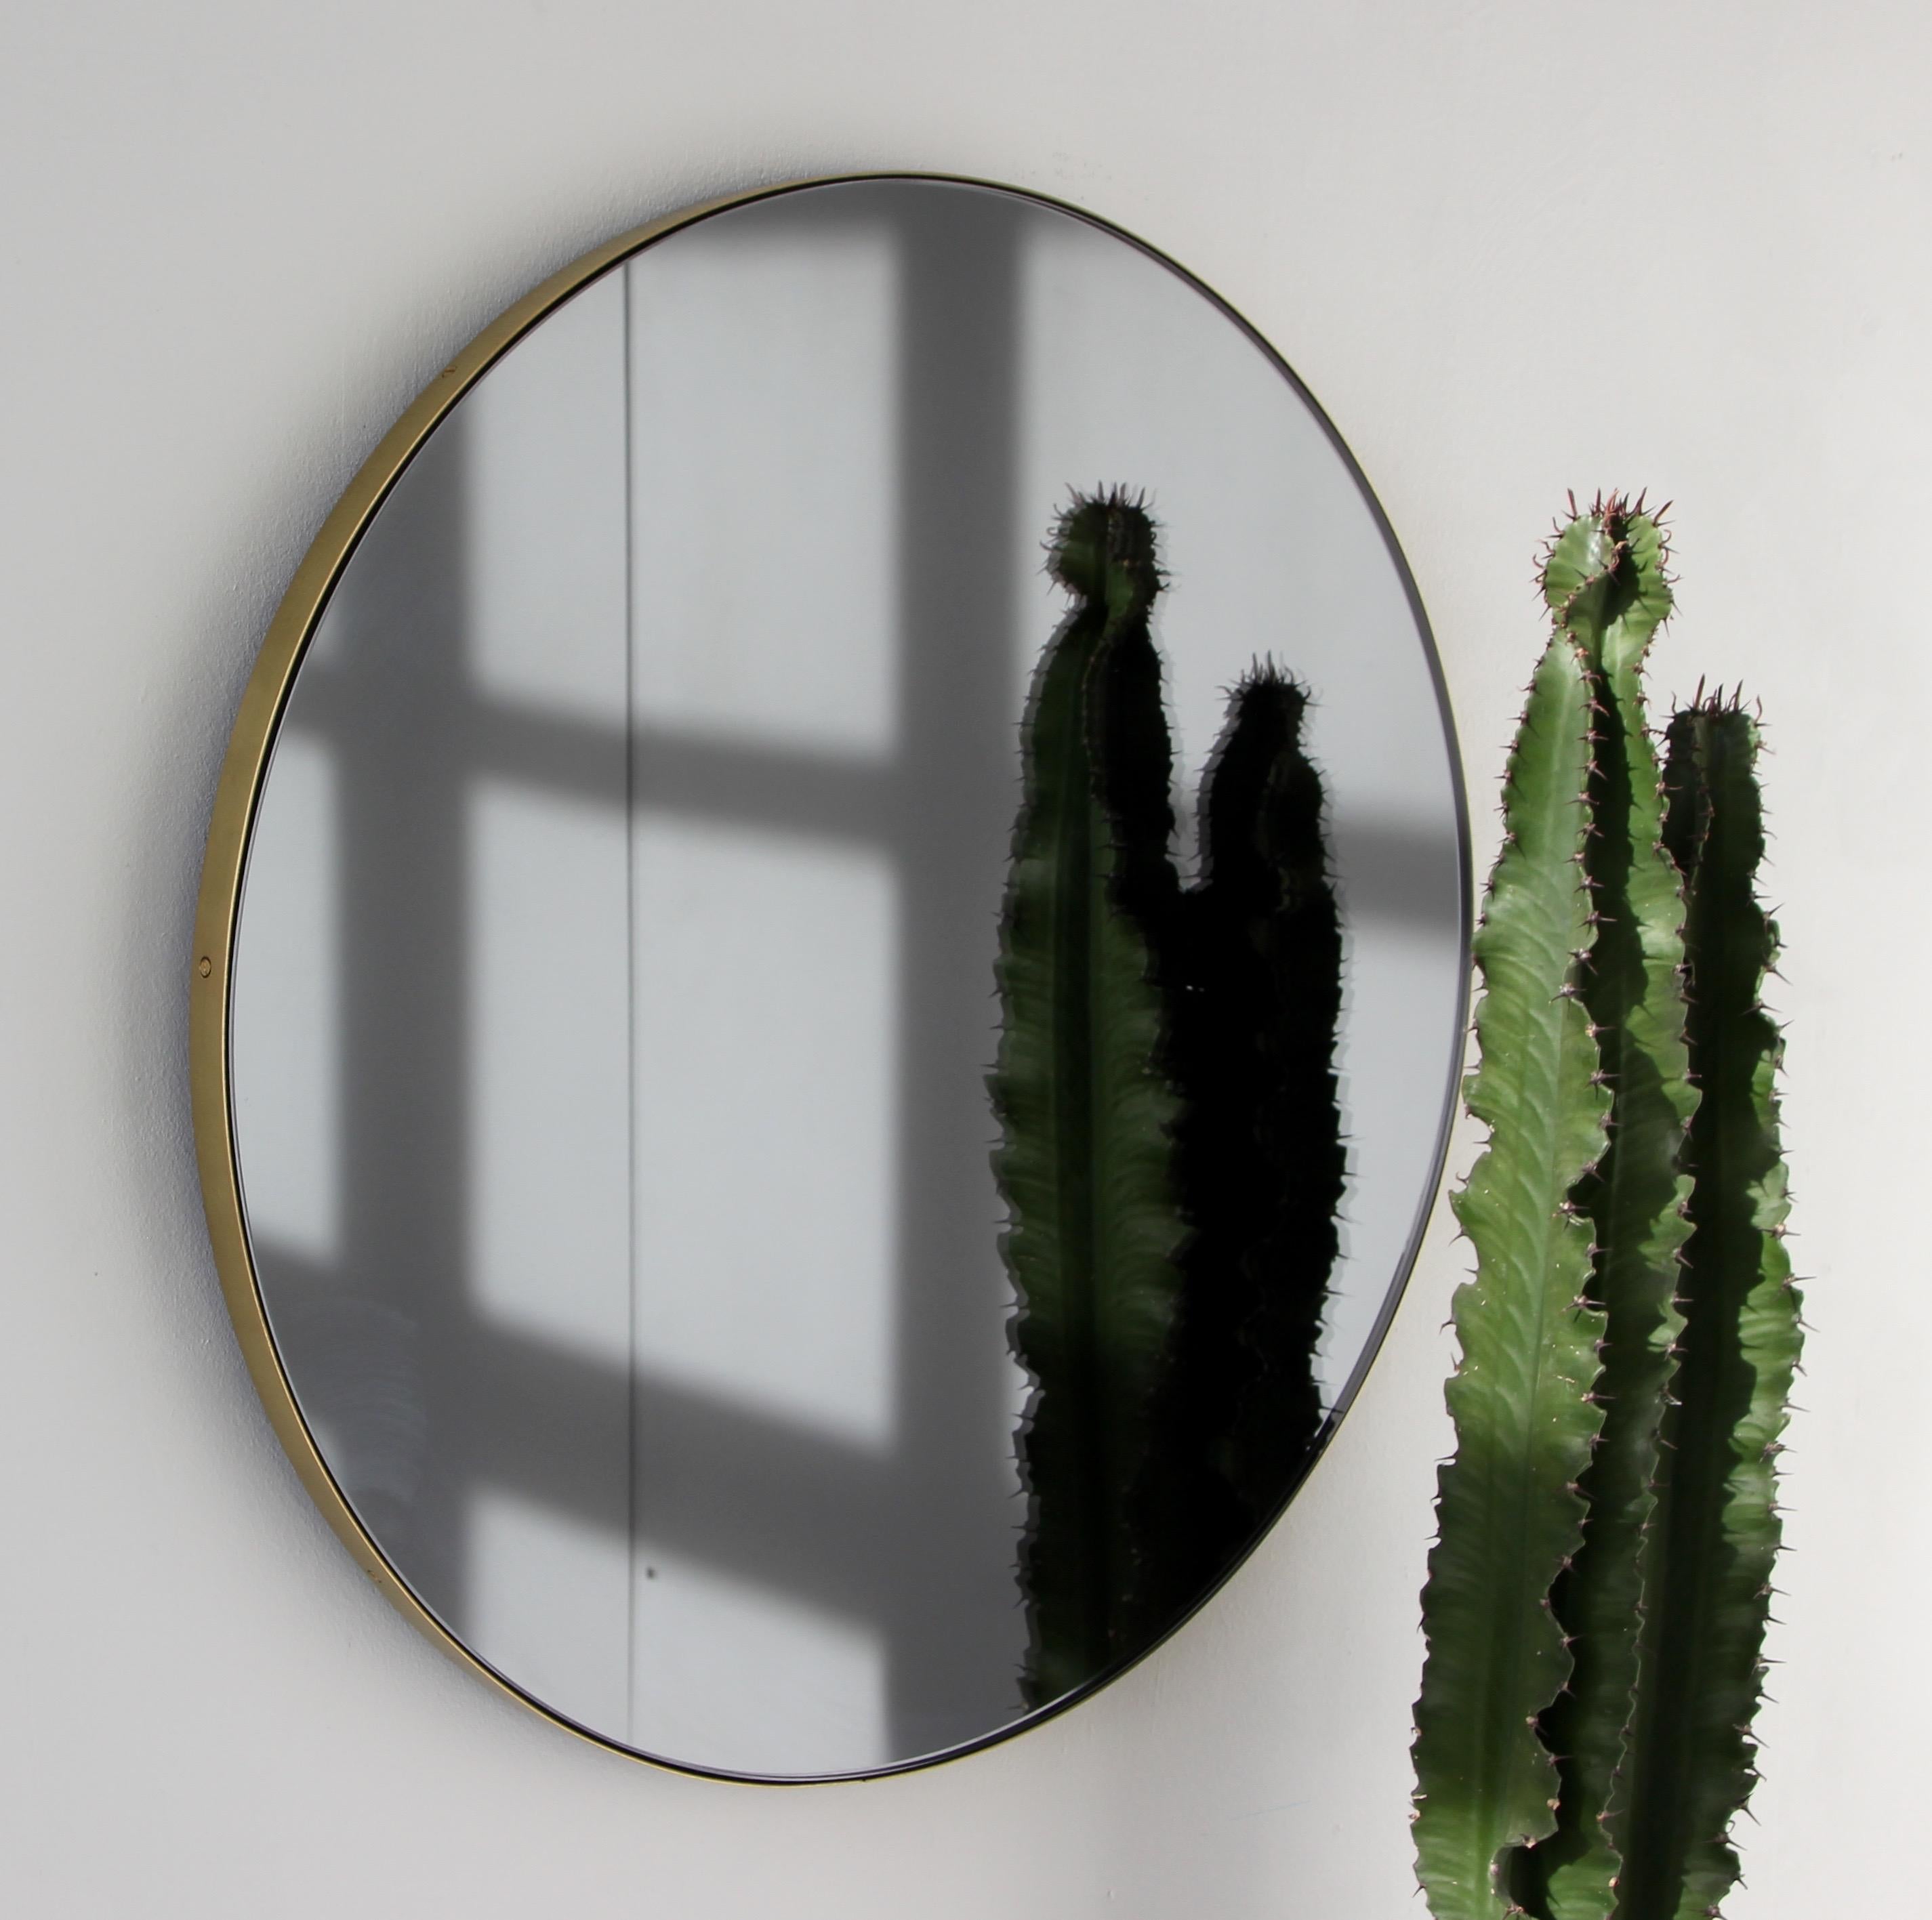 Orbis Black Tinted Round Contemporary Mirror with a Brass Frame, Medium In New Condition For Sale In London, GB